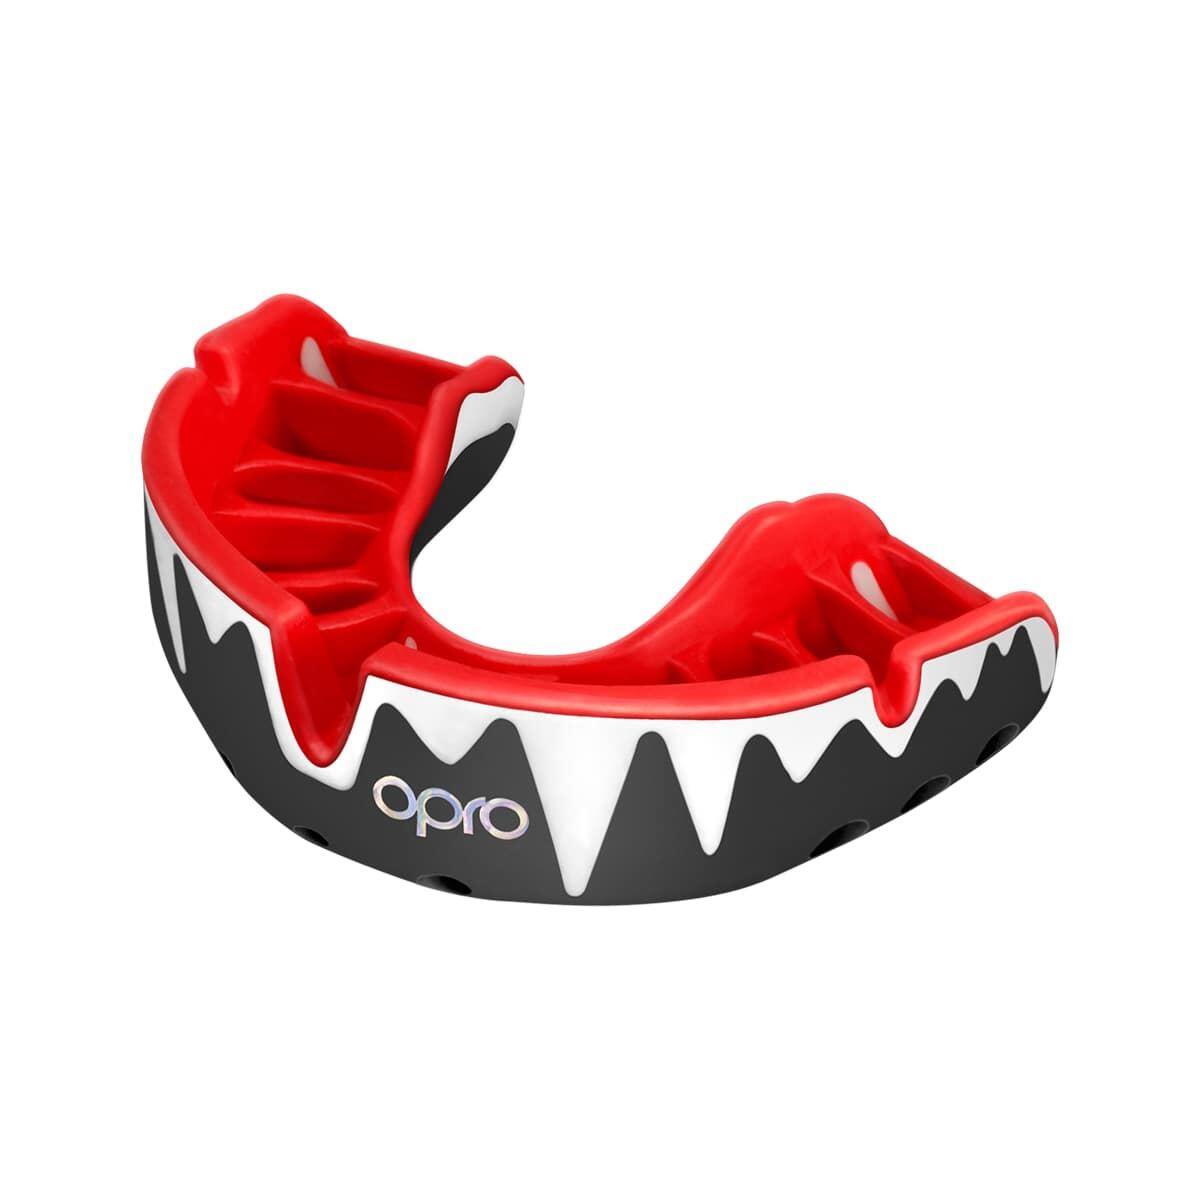 OPRO Black/White/Red Opro Platinum Fangz Self-Fit Mouth Guard